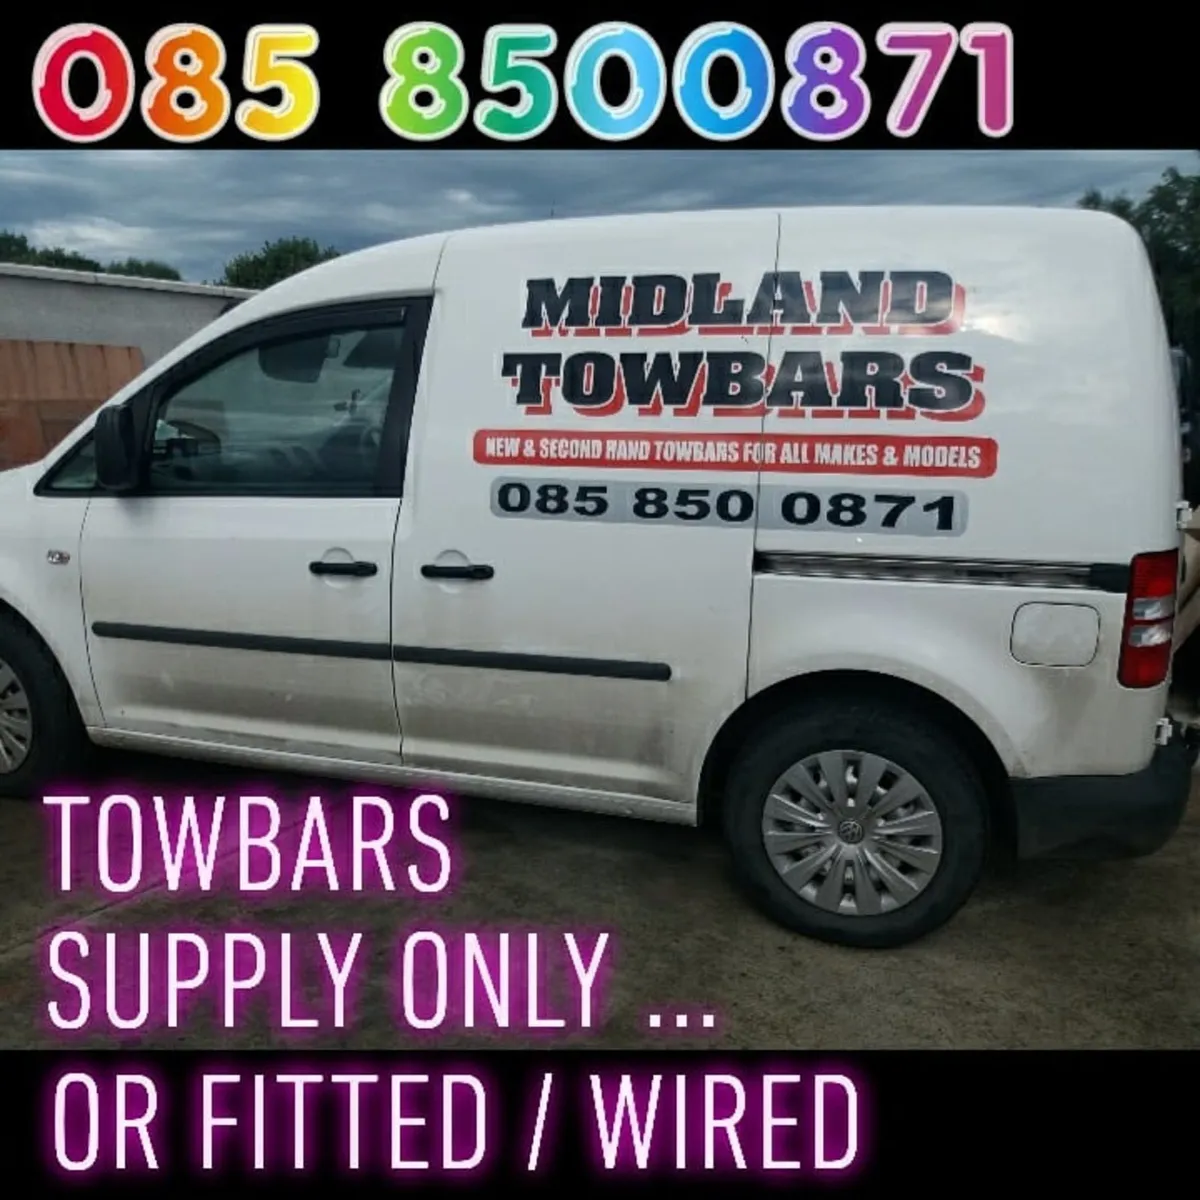 TOWBARS / HITCHS ...  SUPPLY ONLY